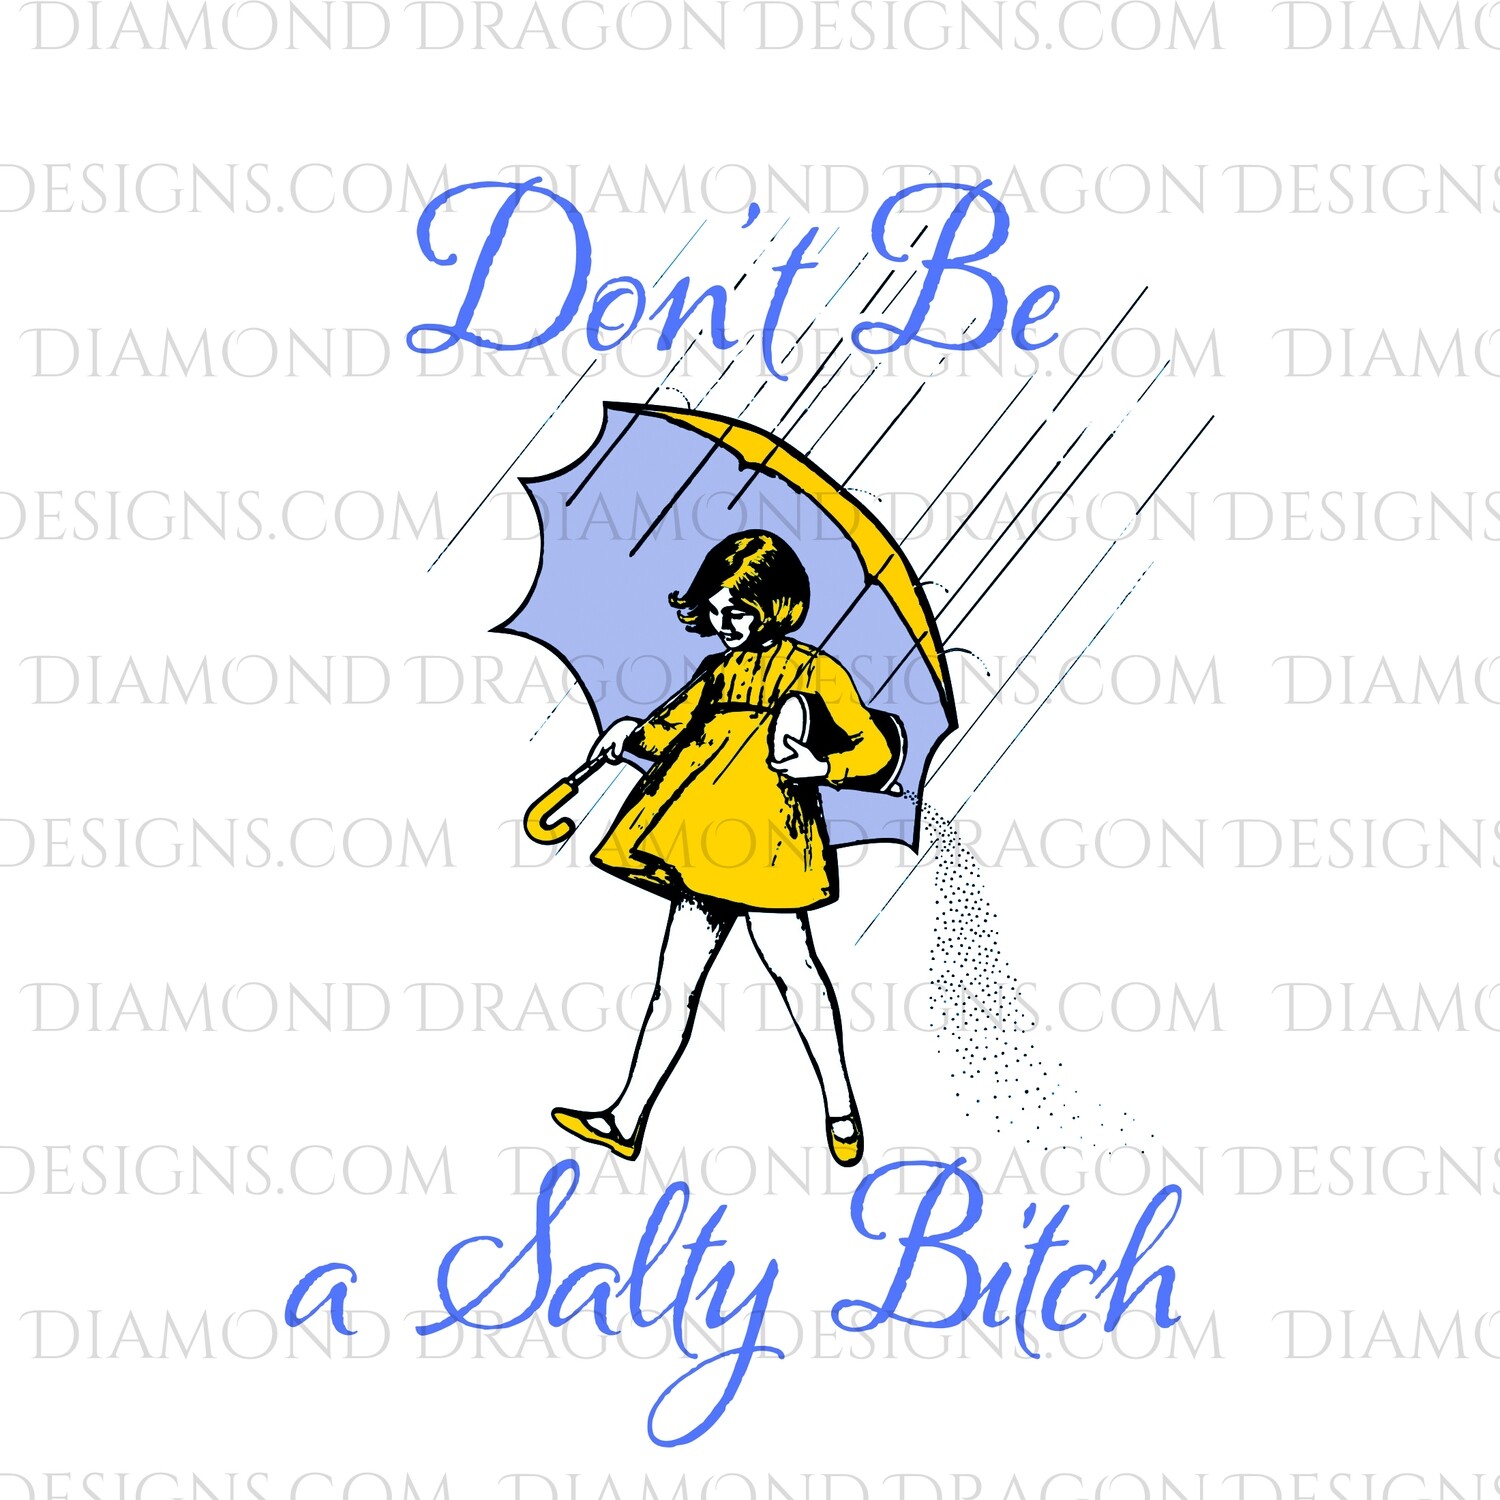 Quotes - Yellow, Don't Be a Salty Bitch, Digital Image